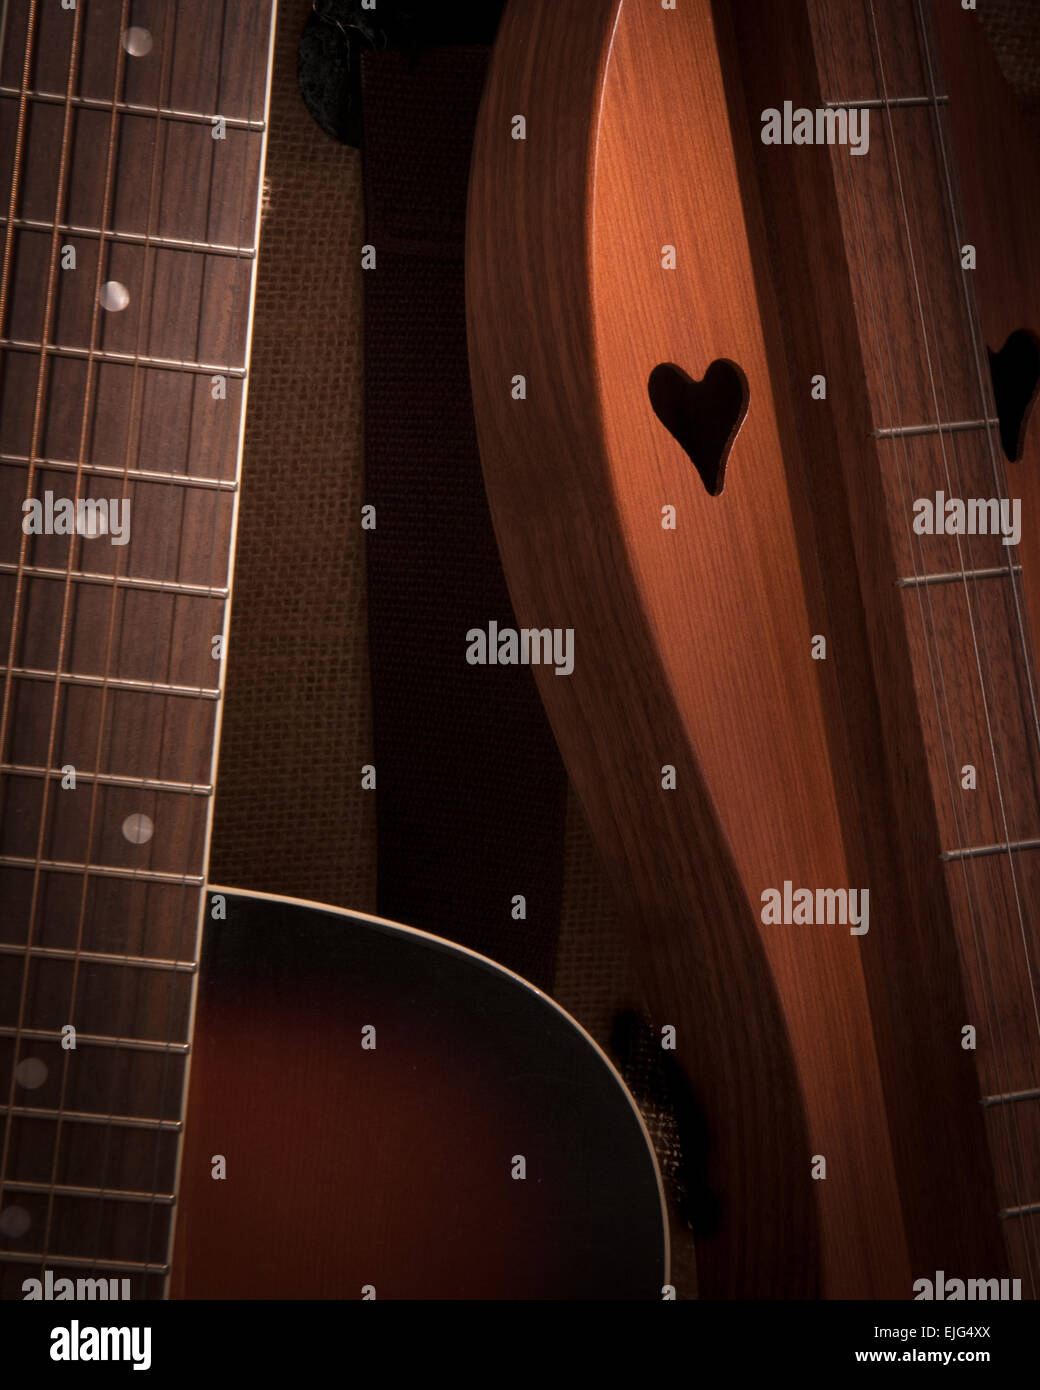 Acoustic resonator and a beautifully carved dulcimer with heart cut-outs rest together in this close-up shot taken against a burlap background. Stock Photo